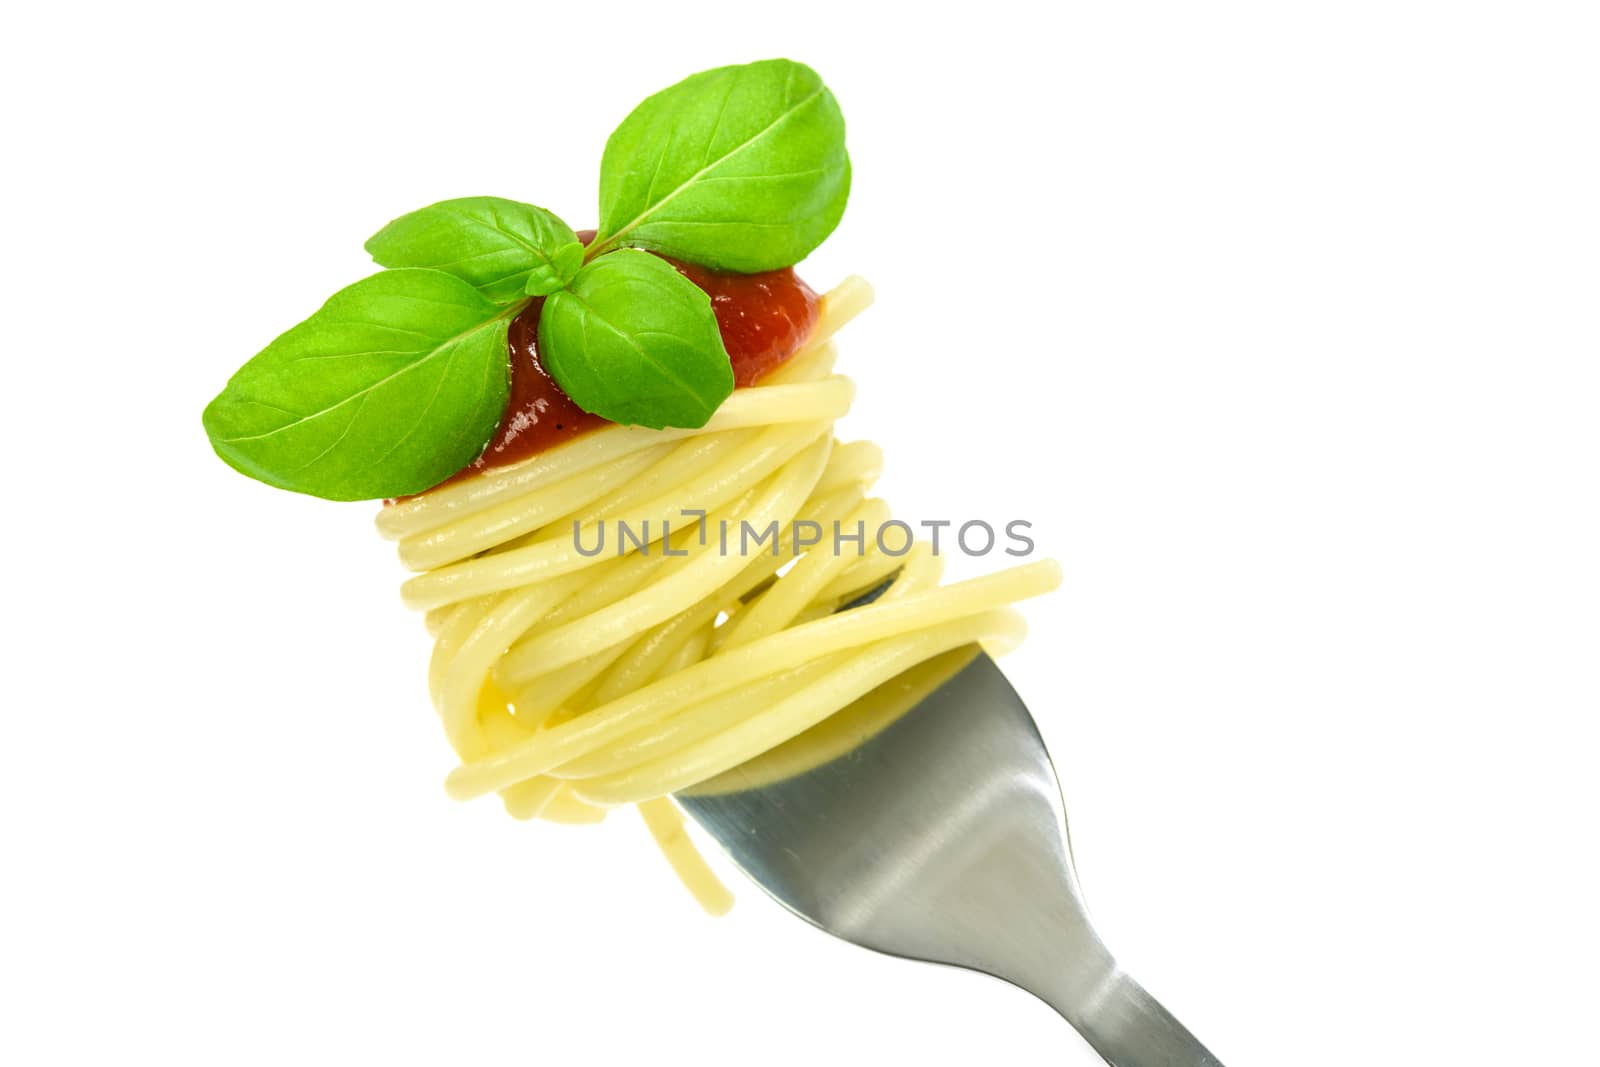 Spaghetti pasta with sauce and basil on a fork isolated on a white background